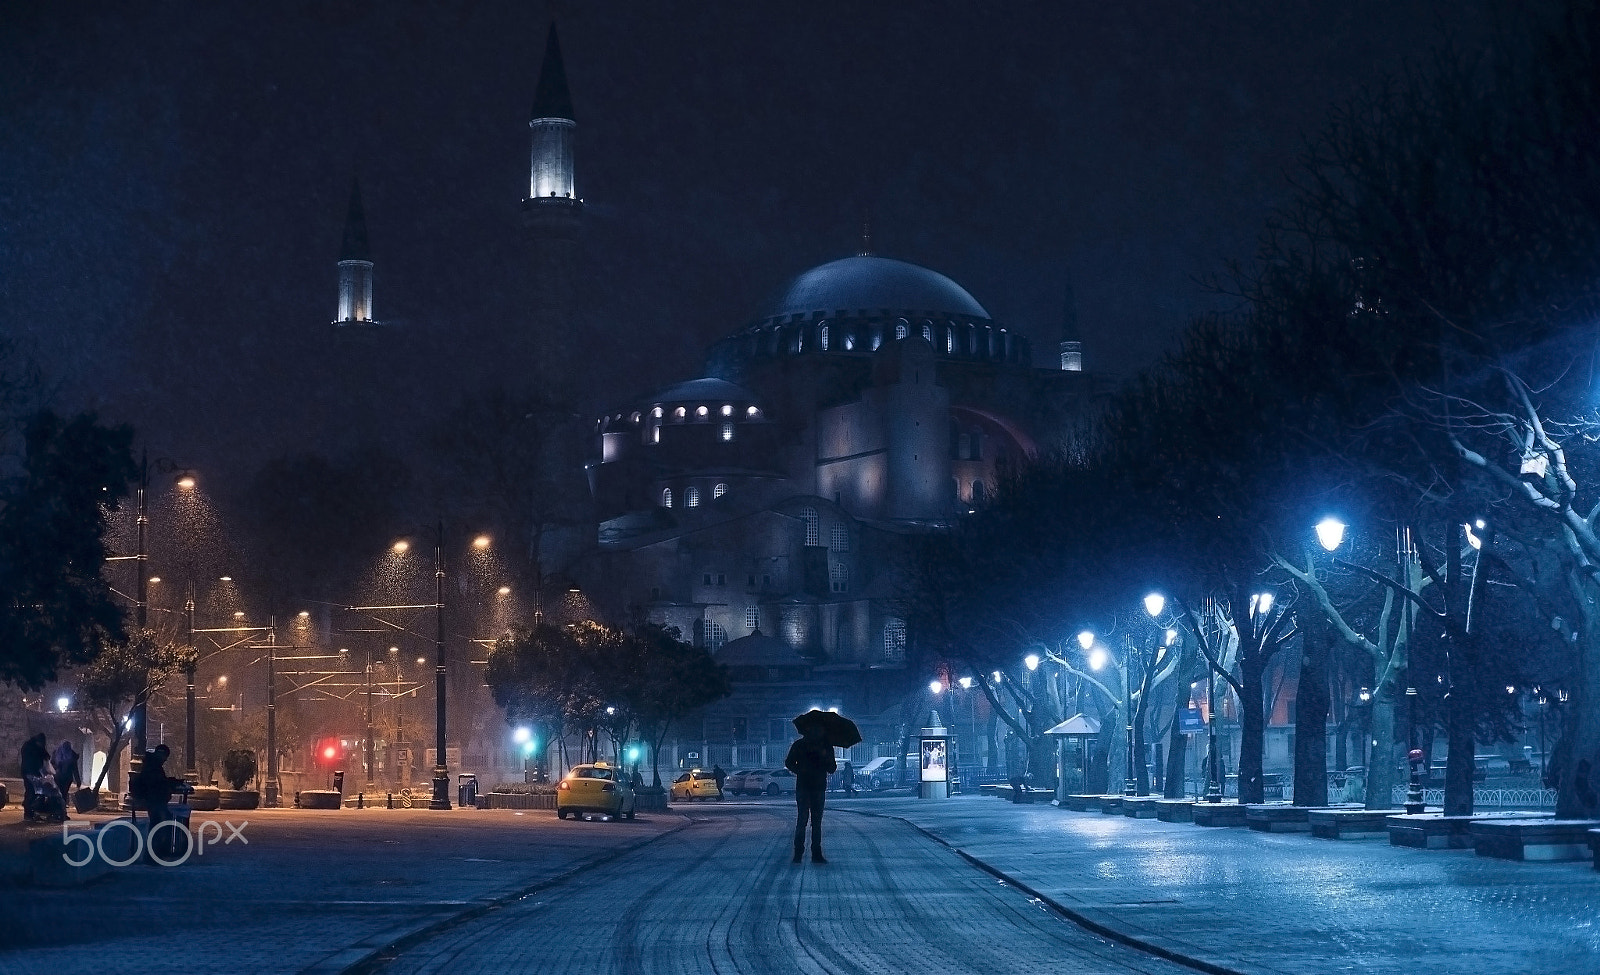 Sony a7R II + Sony DT 50mm F1.8 SAM sample photo. Hagia sophia during snowstorm photography